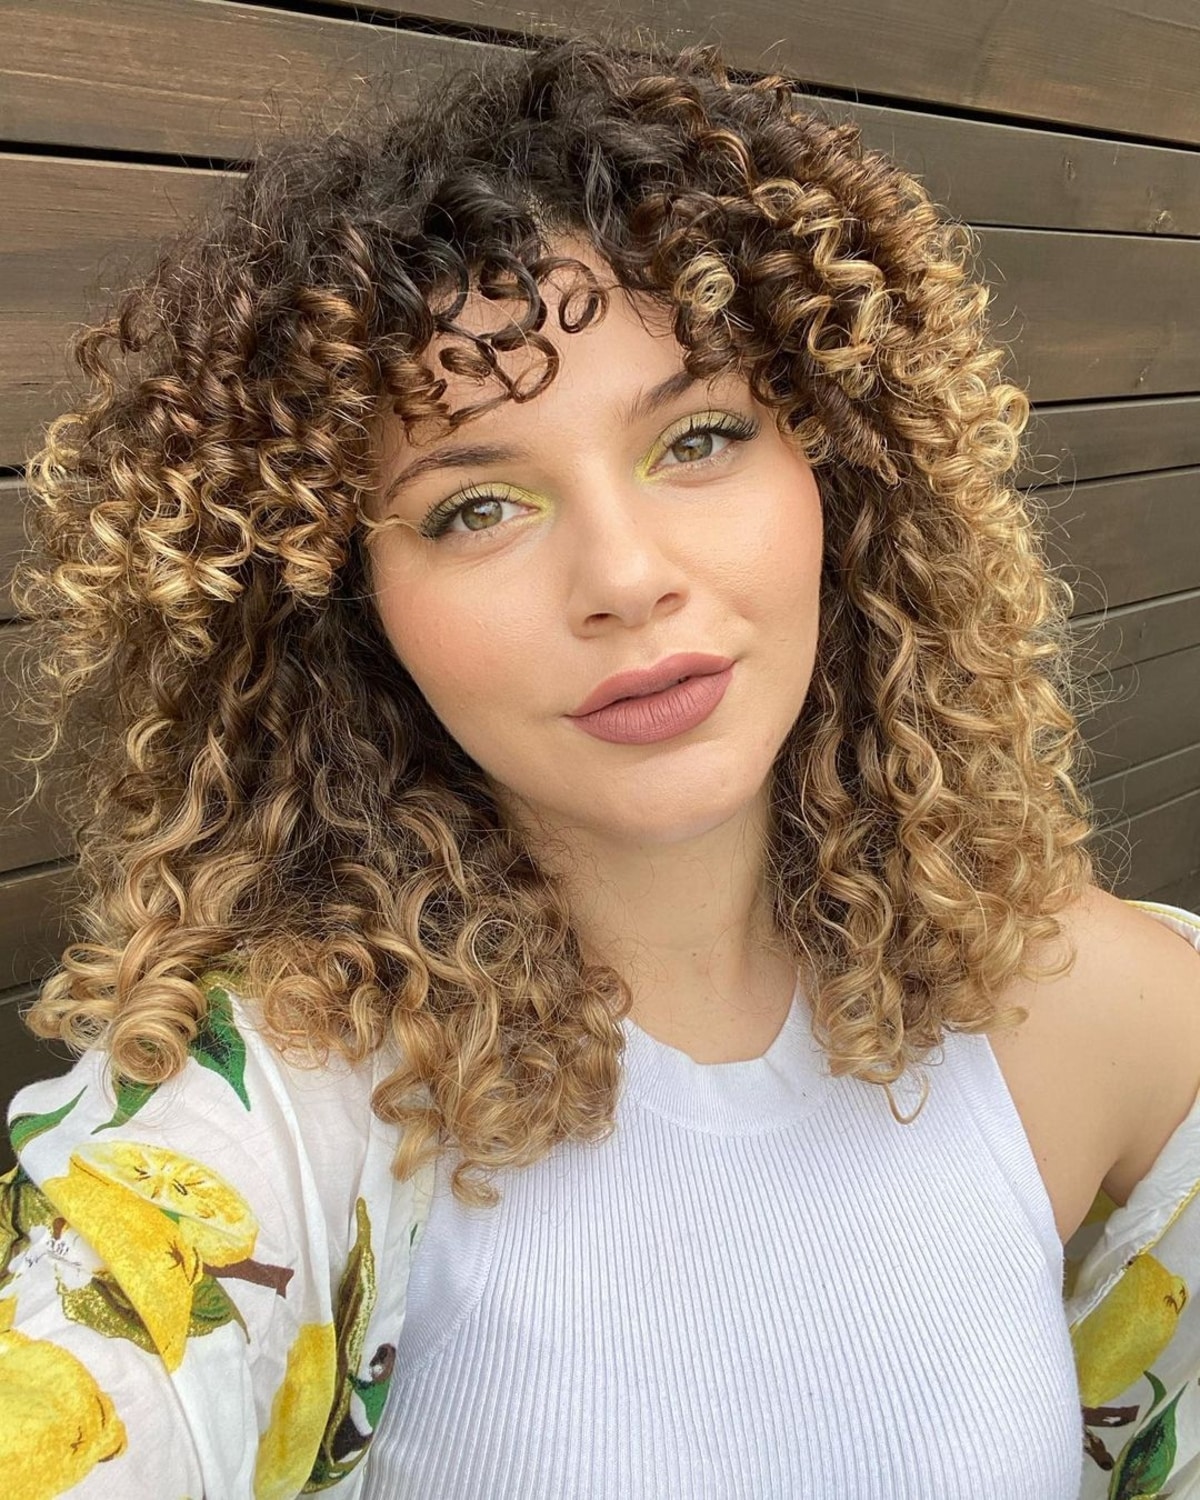 10 Most Popular Ways to Get Curly Hair with Bangs Right Now